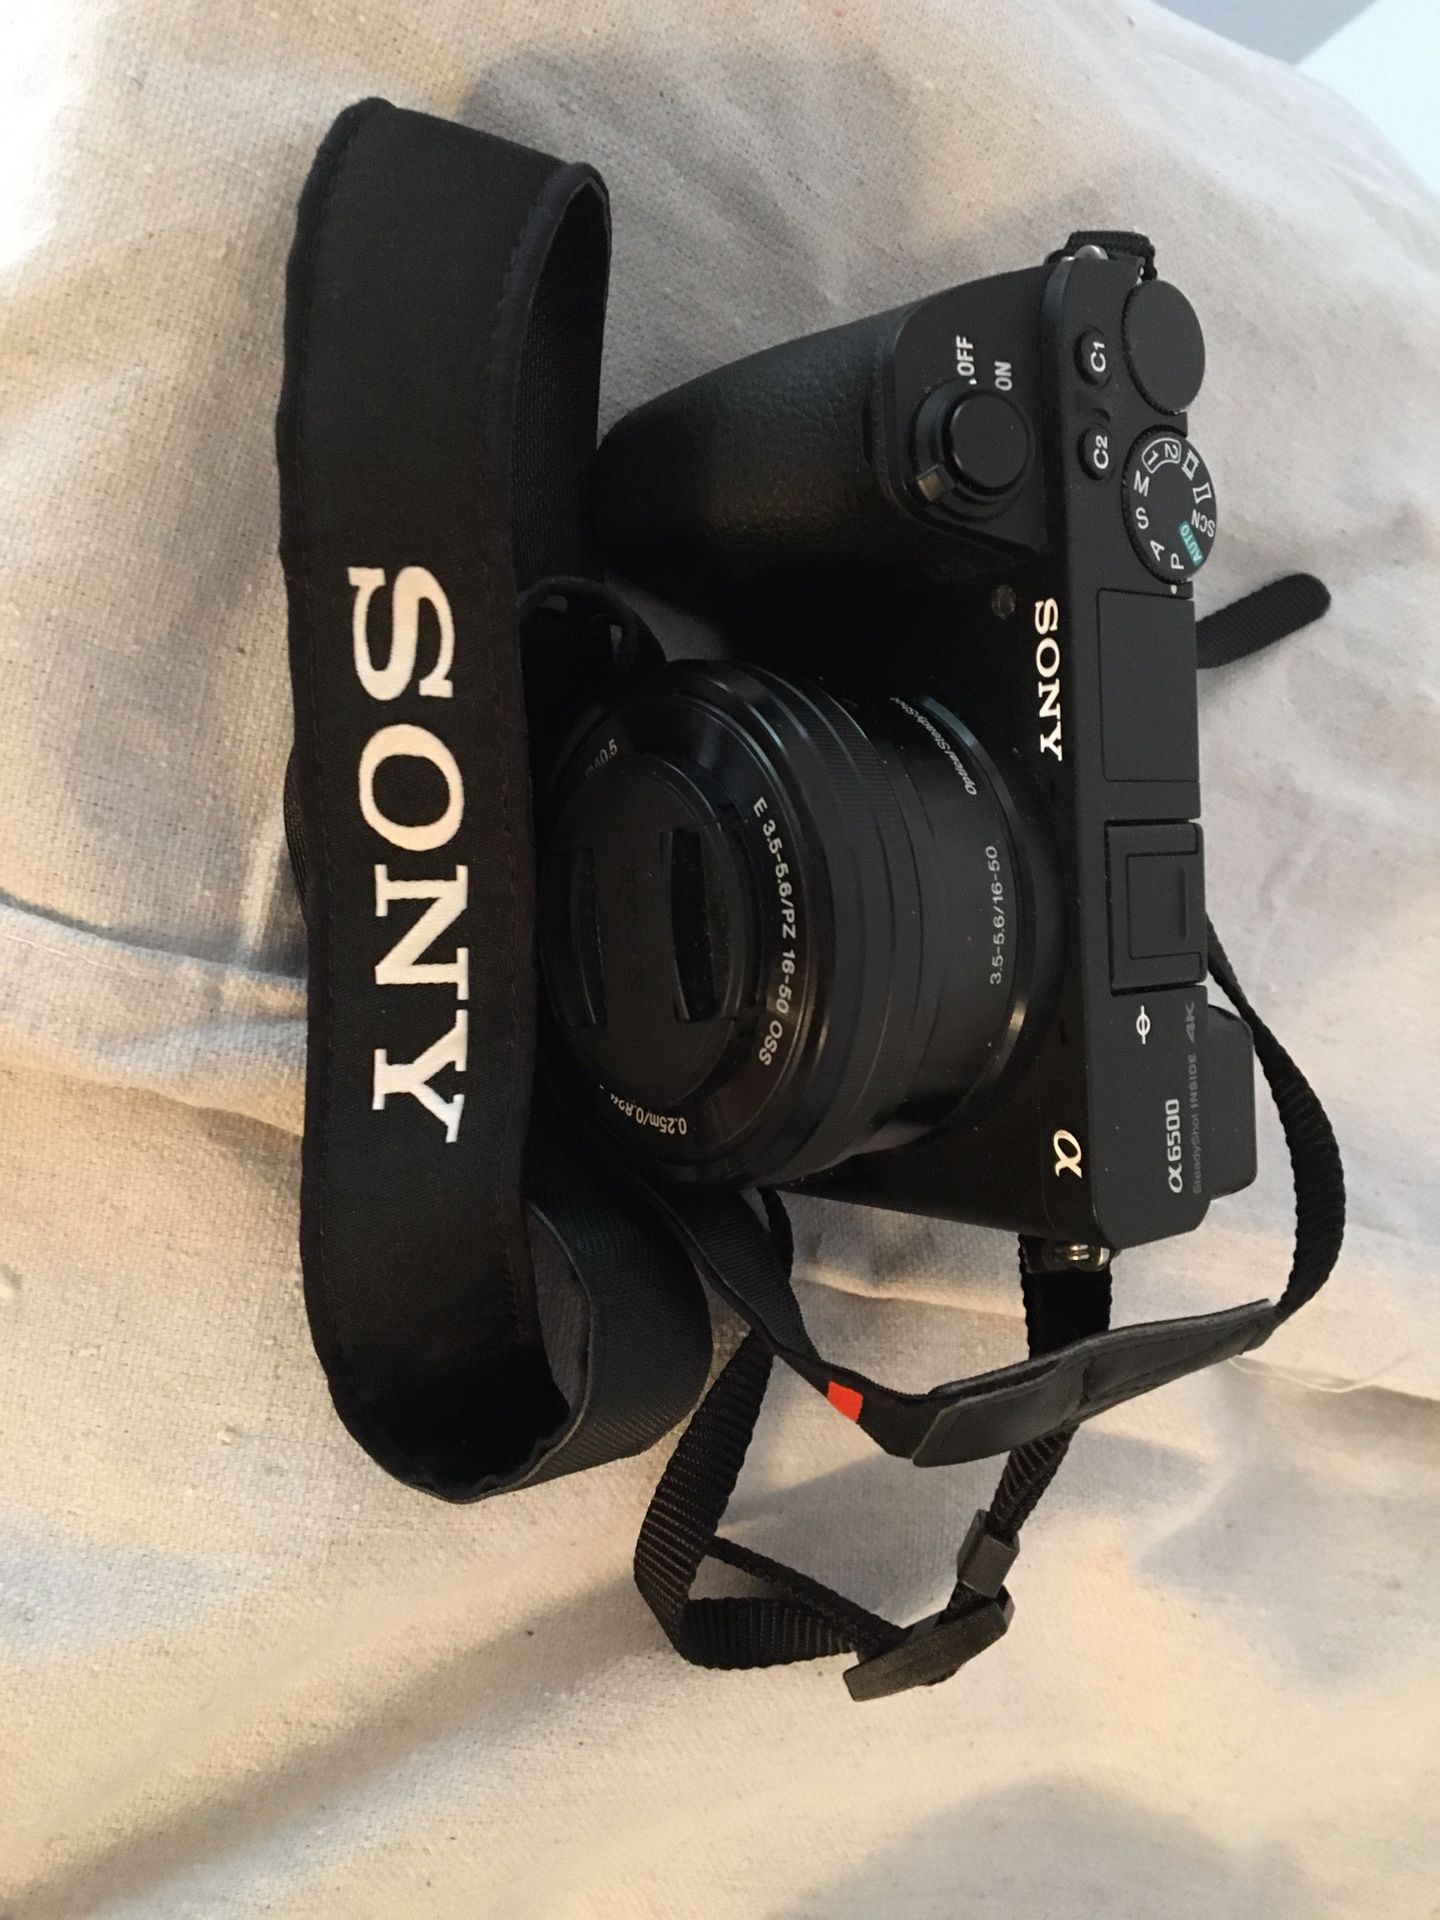 Must sell, like new! Sony a6500 mirrorless digital camera & video. Great price! Great camera!